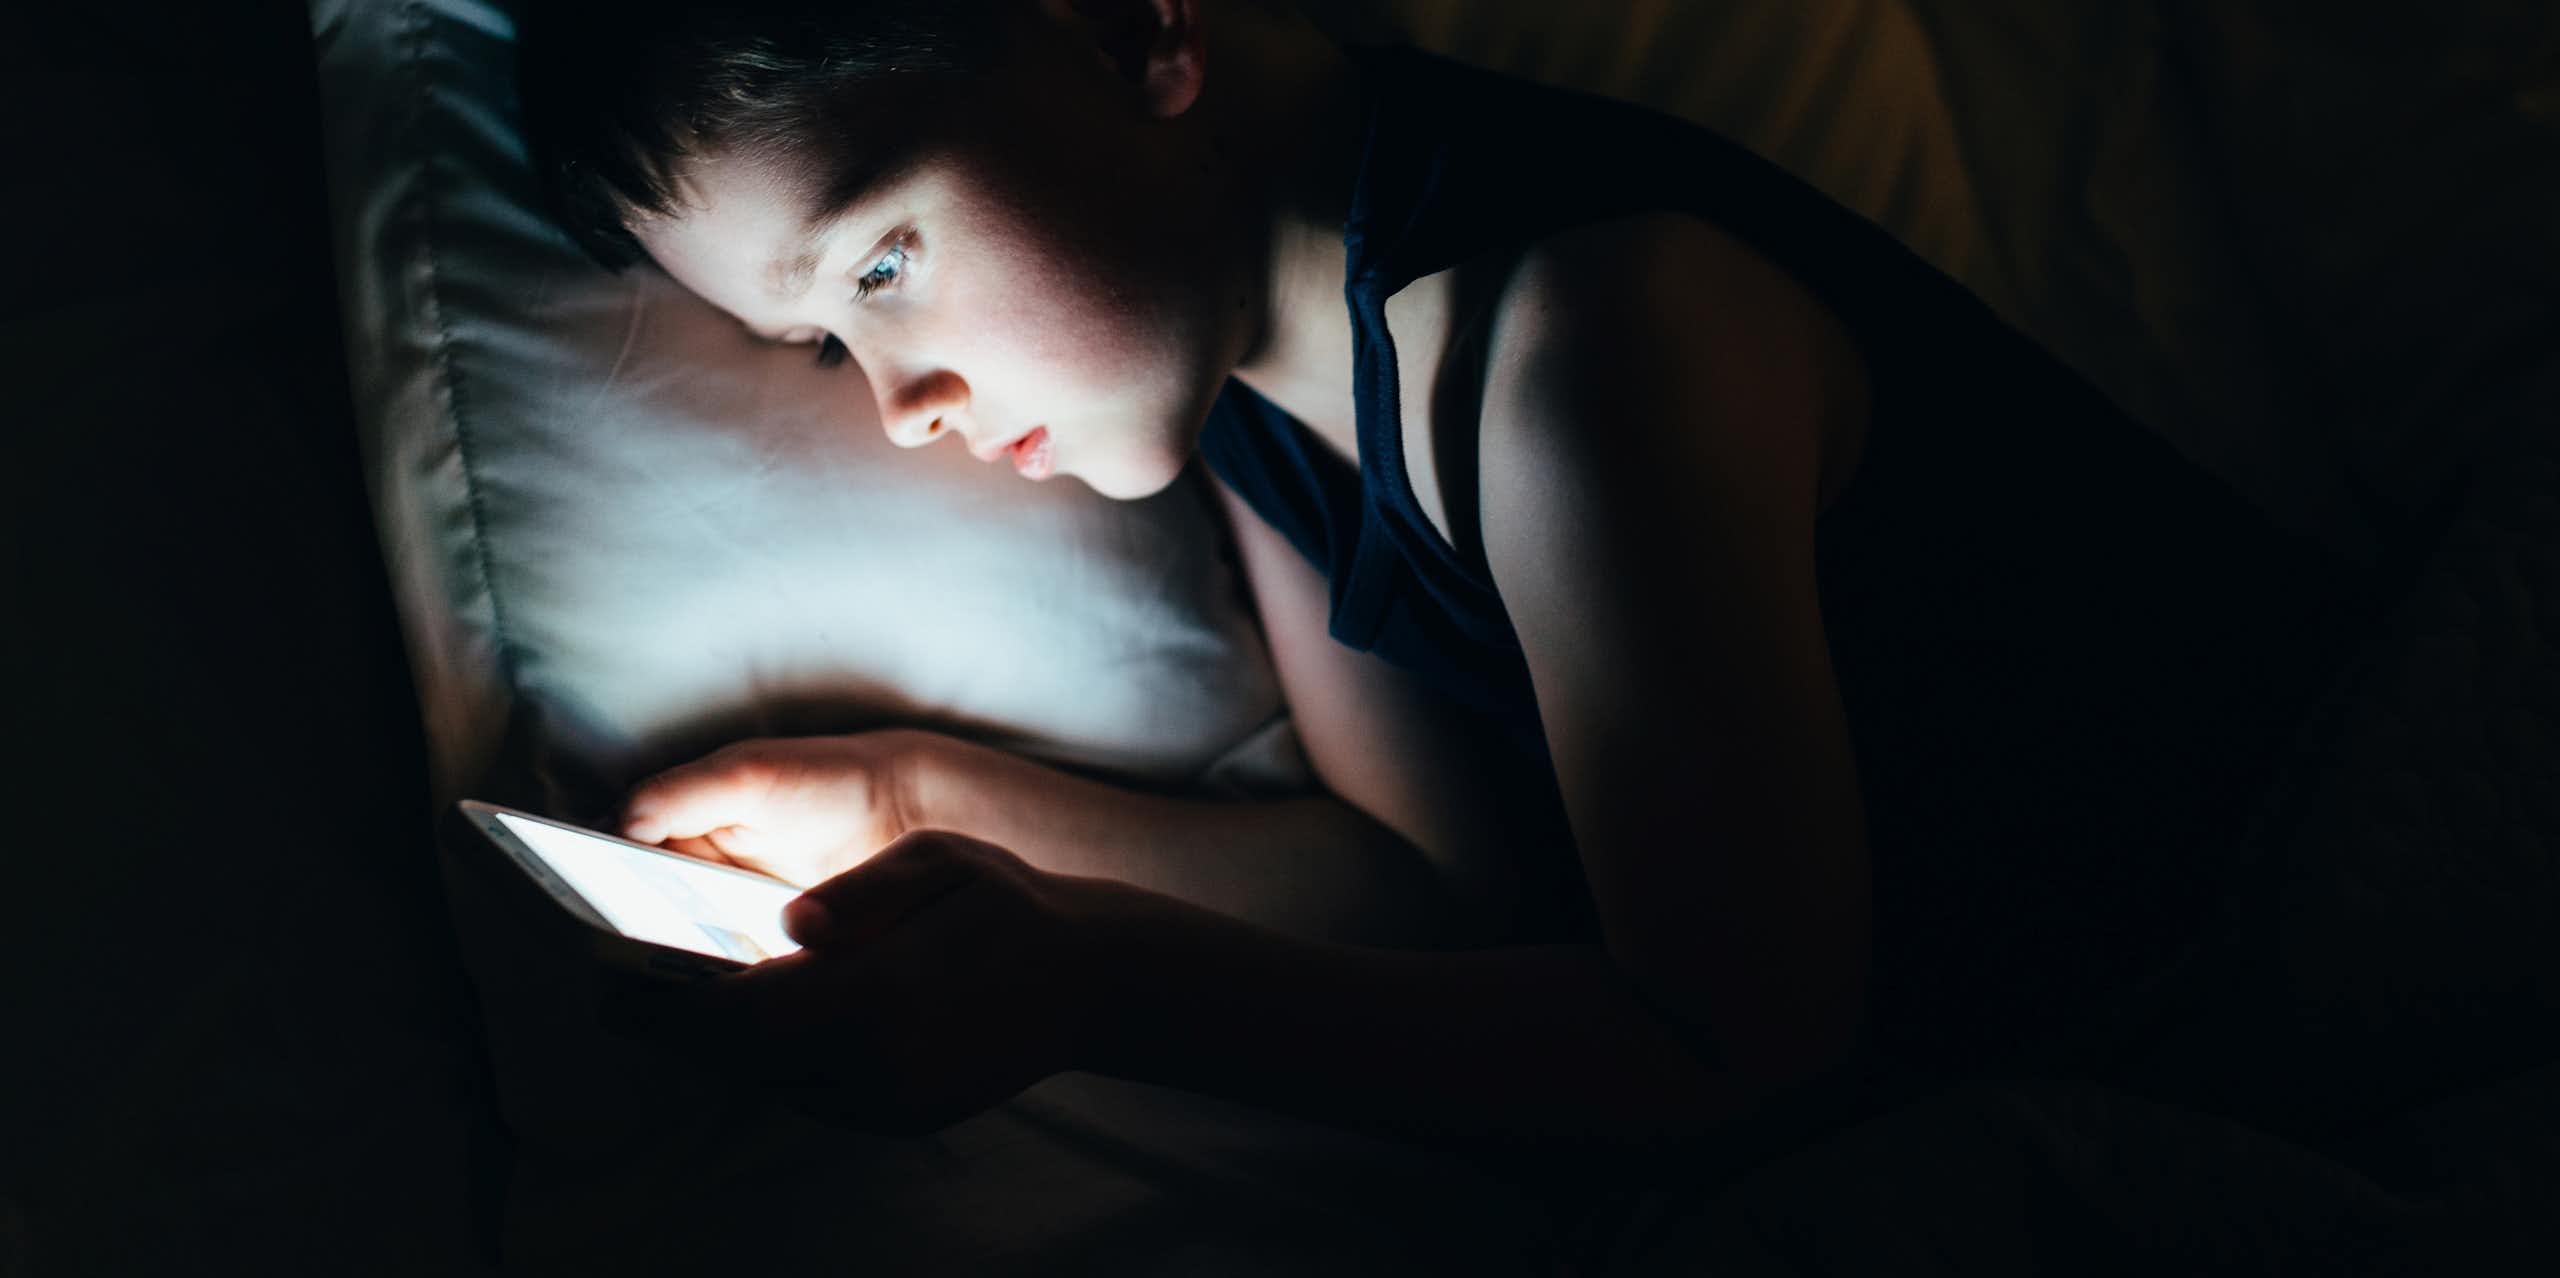 A young boy late at night on a smartphone in bed.